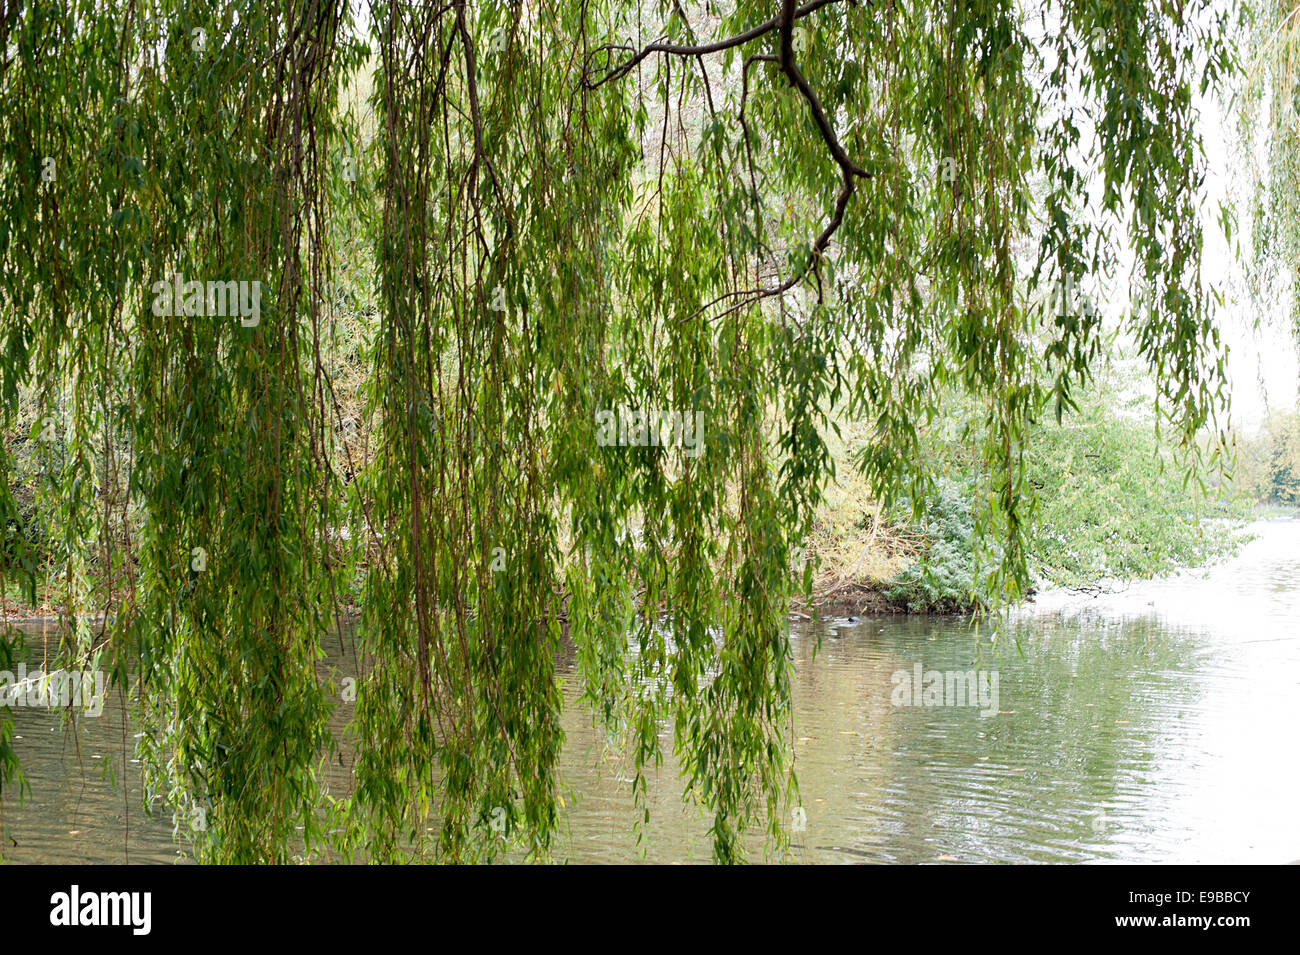 Wonderful scene of beautiful willow trees overhanging the lake in Regents Park. Stock Photo